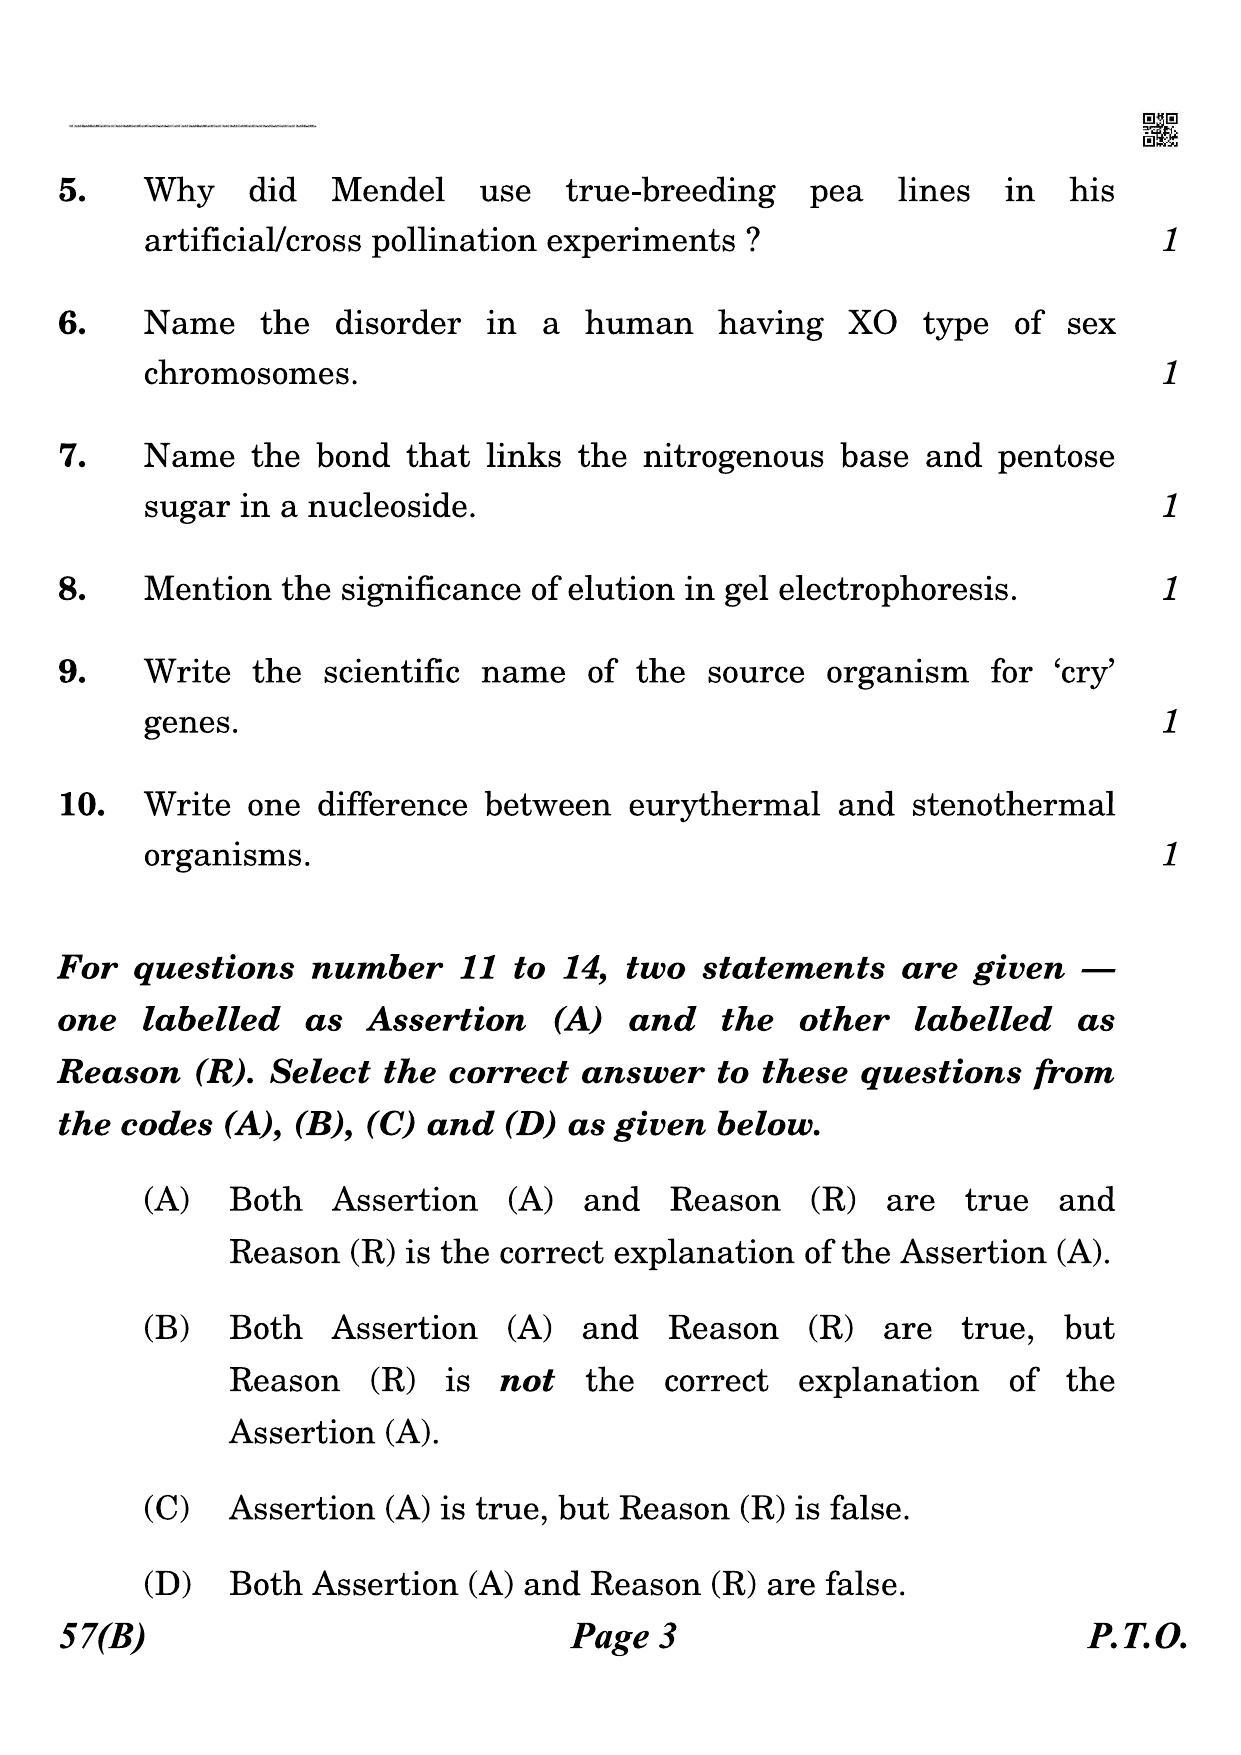 CBSE Class 12 QP_044_biology_for_visually_impared_candidates 2021 Compartment Question Paper - Page 3